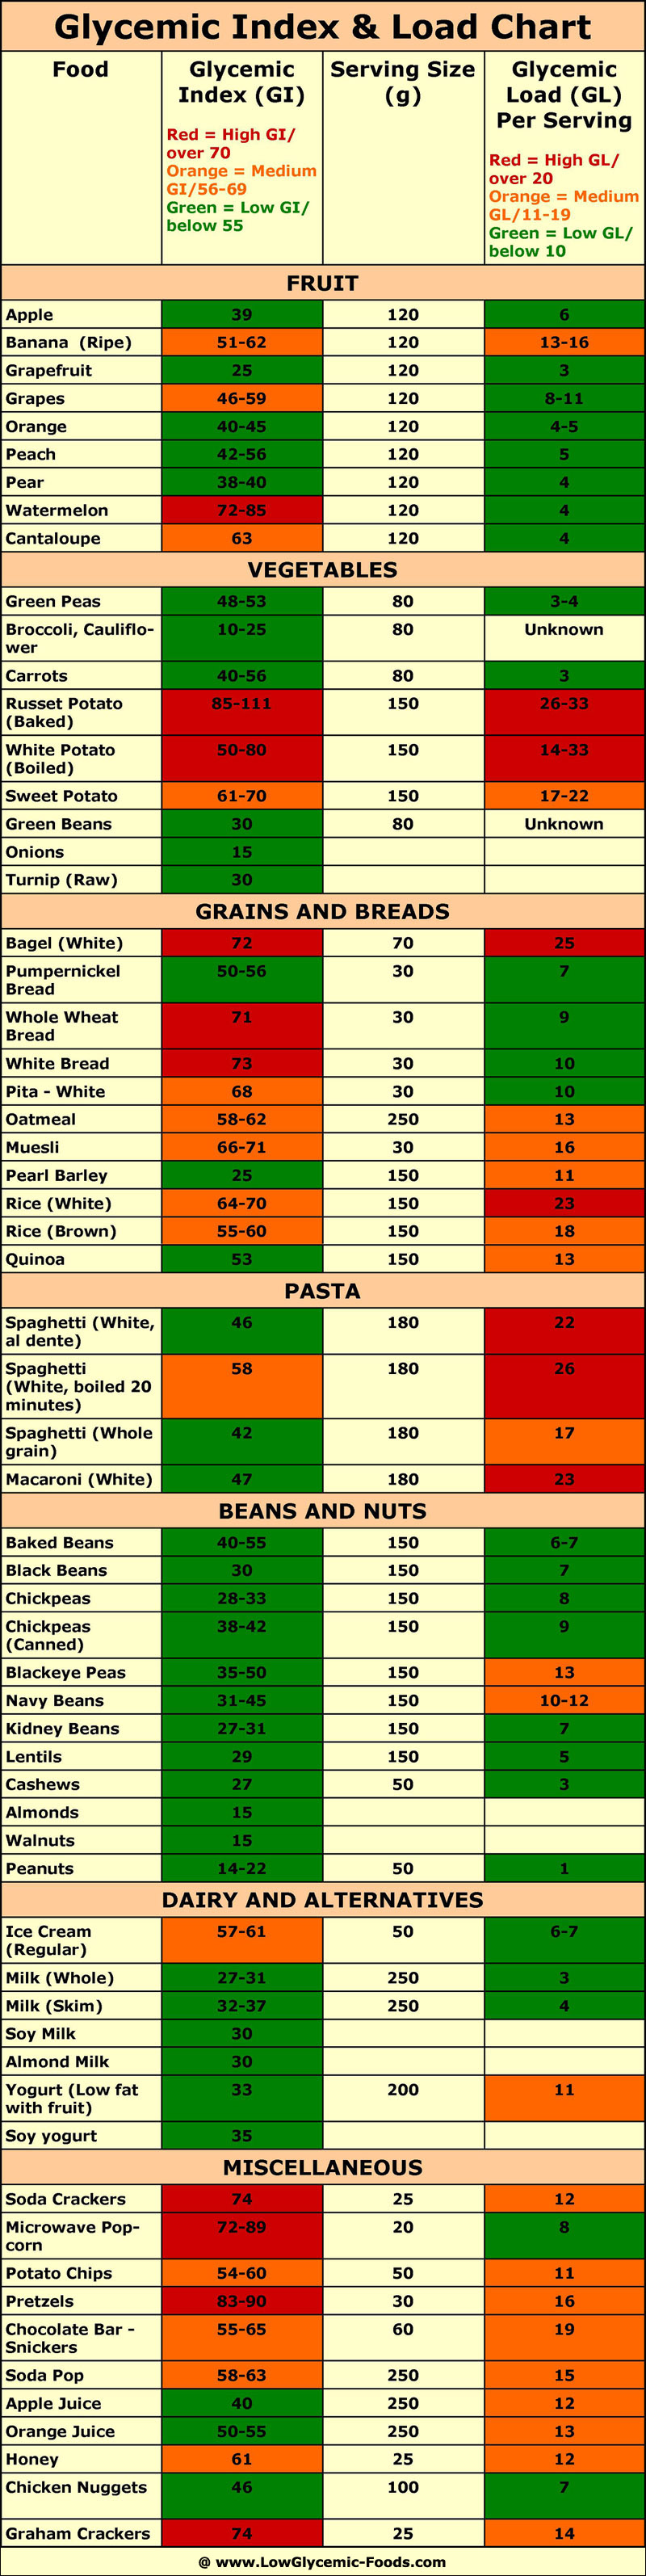 The glycemic index and glycemic load chart with high and low glycemic foods.